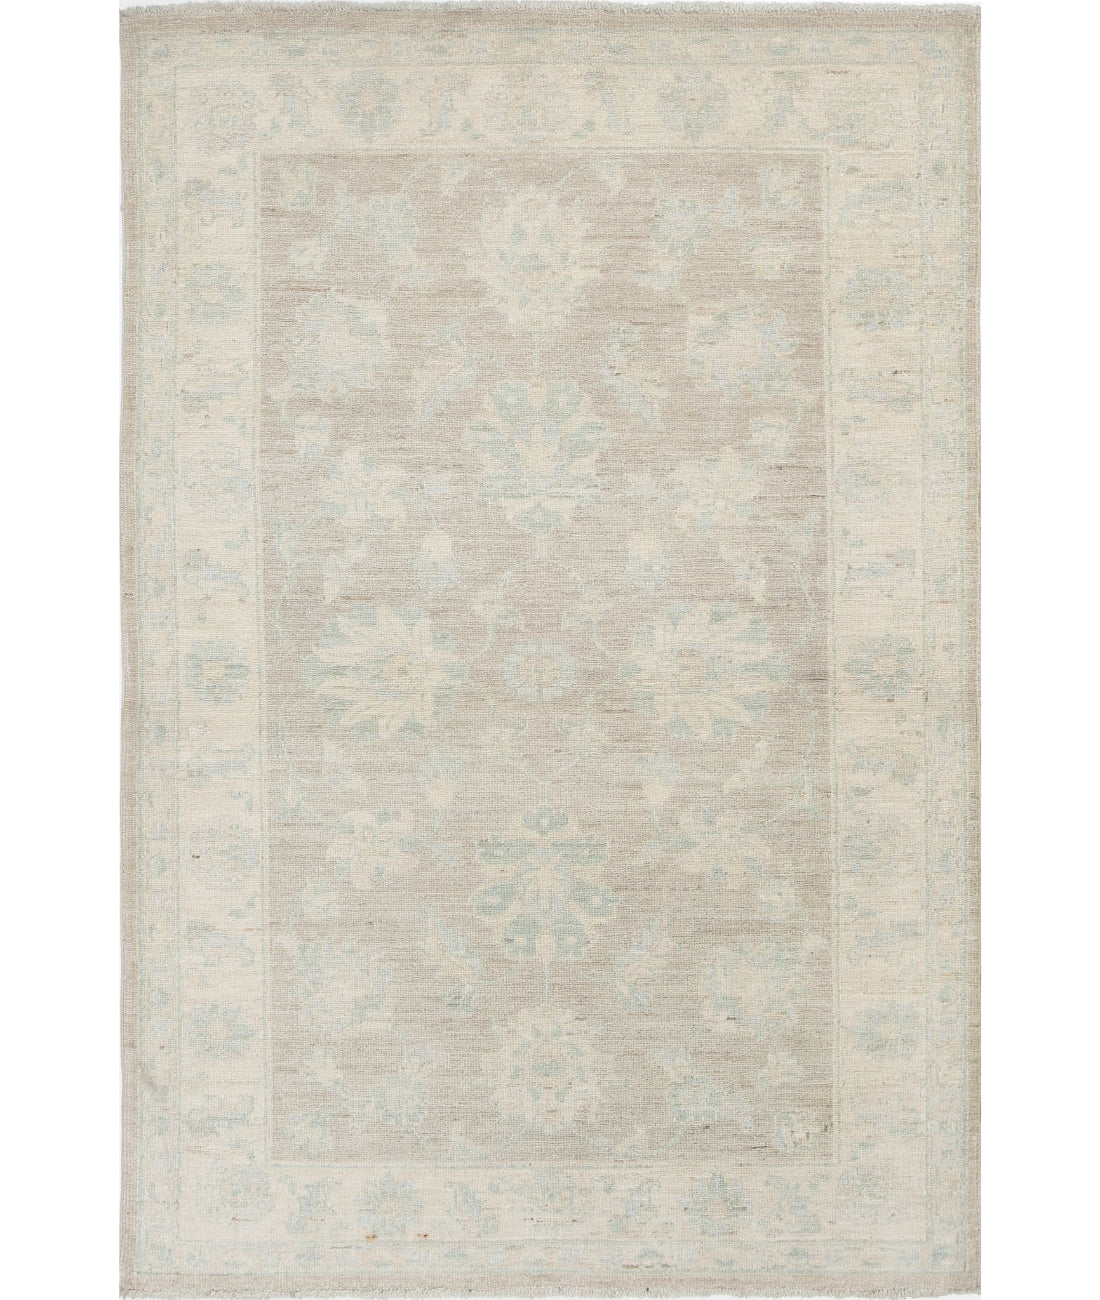 Hand Knotted Serenity Wool Rug - 3'2'' x 4'11'' 3'2'' x 4'11'' (95 X 148) / Brown / Ivory